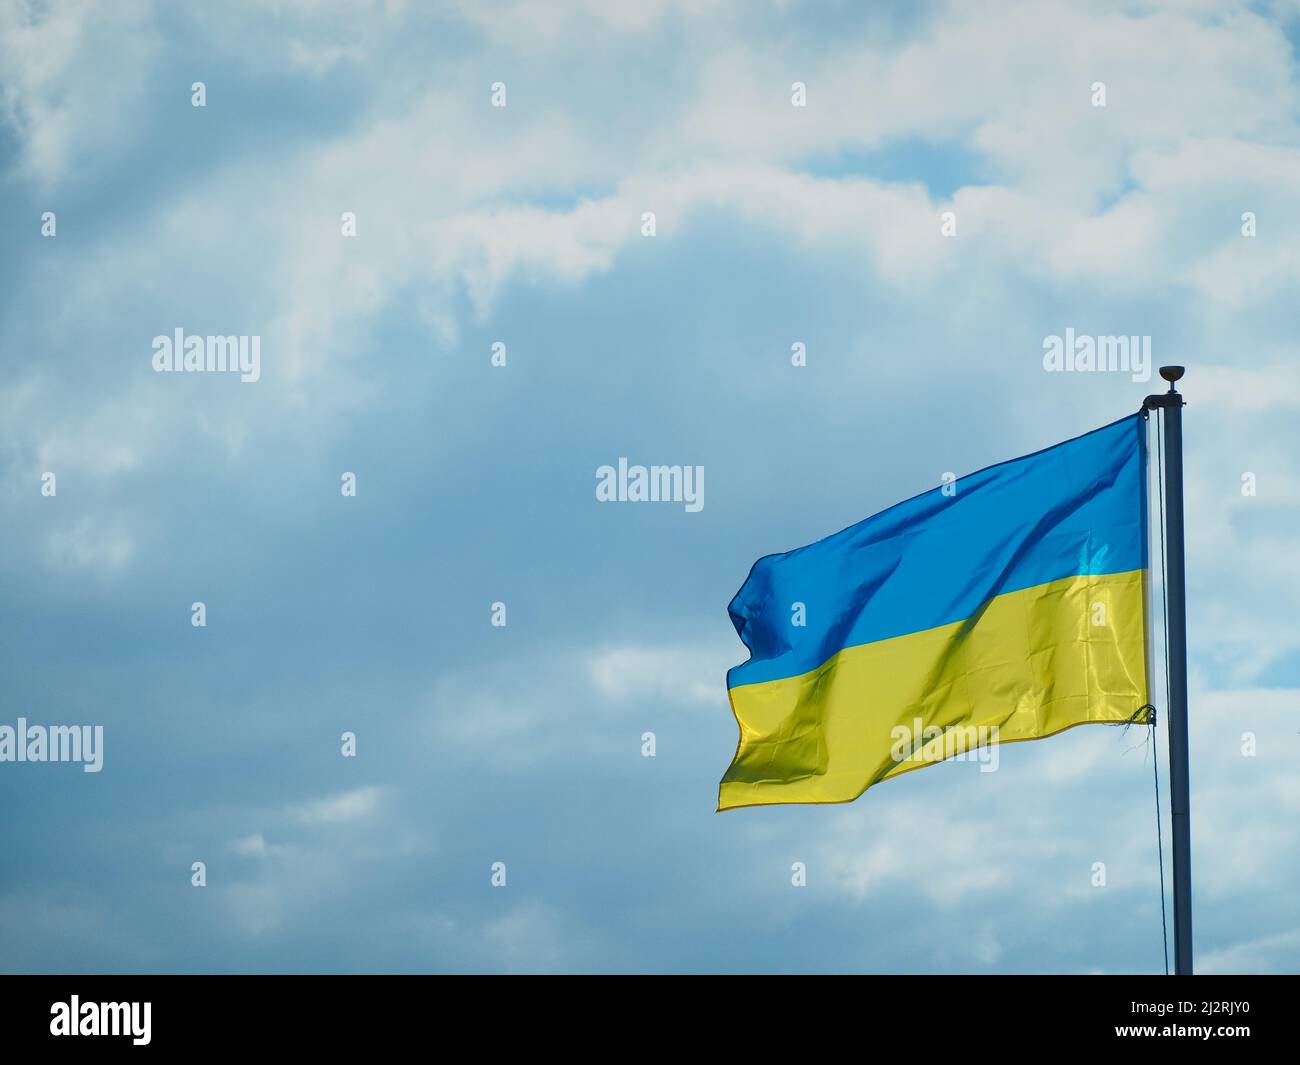 The flag of Ukraine flys against a cloudy blue sky in solidarity with the people of Ukraine. Stock Photo